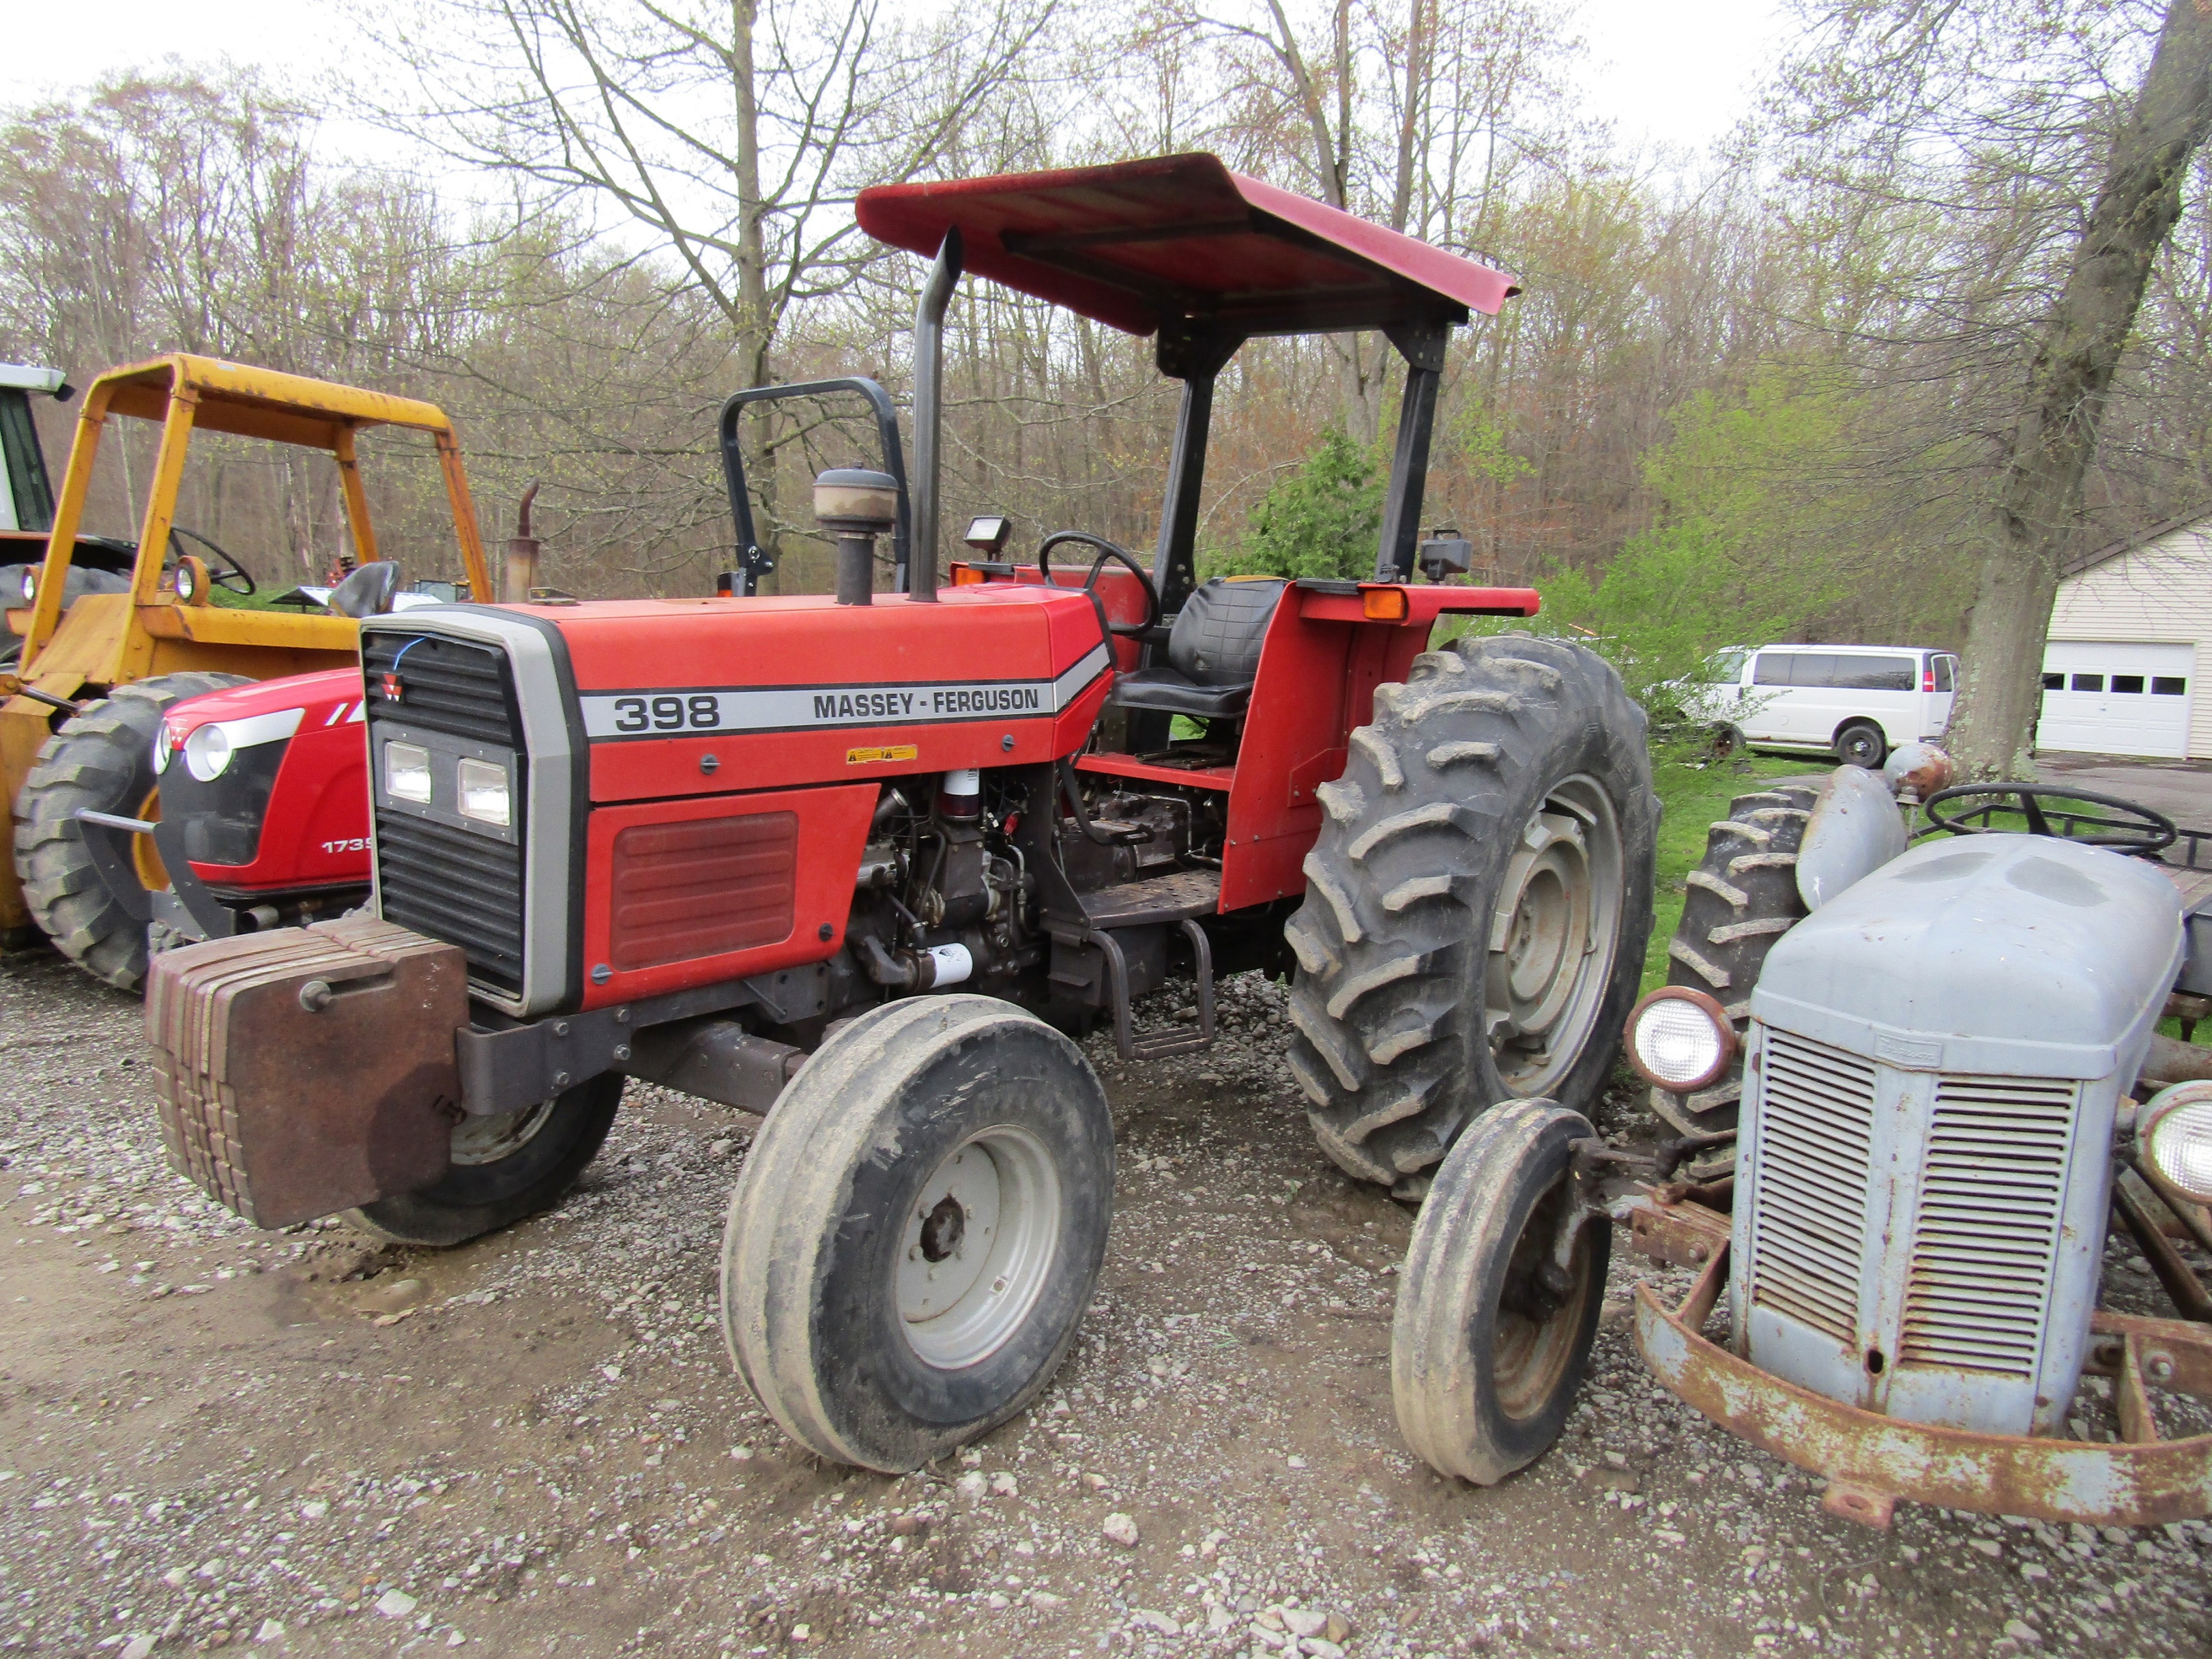 1986-massey-ferguson-398-tractor-for-sale-in-hermitage-pa-ironsearch